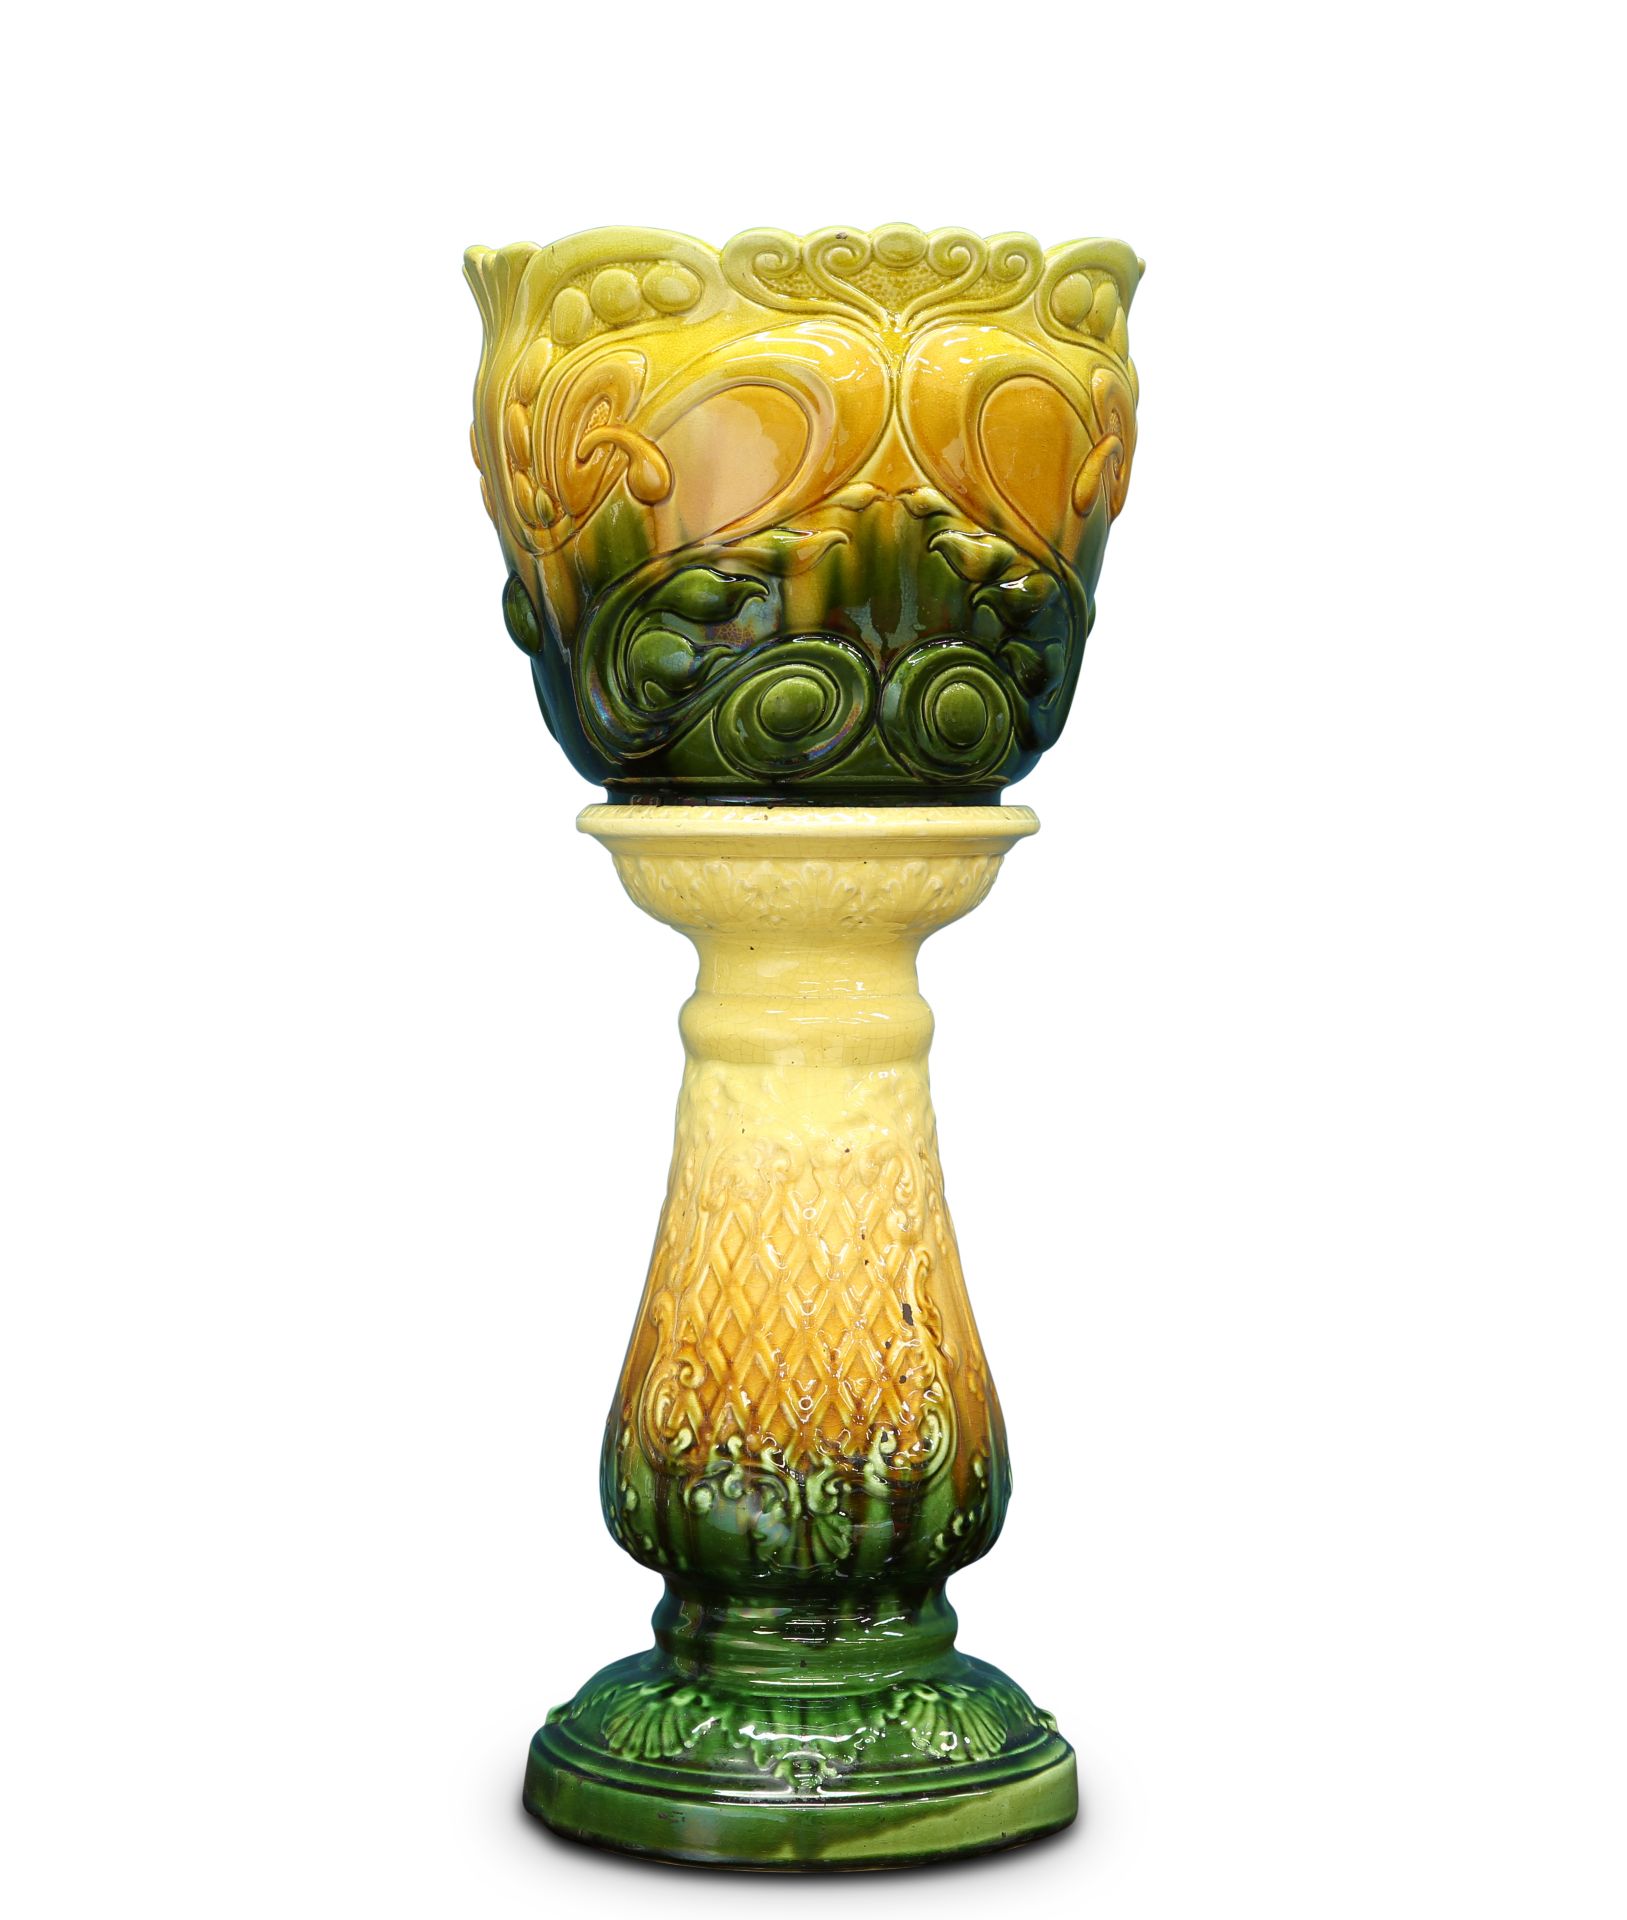 A BRETBY JARDINIERE ON STAND, LATE 19TH CENTURY